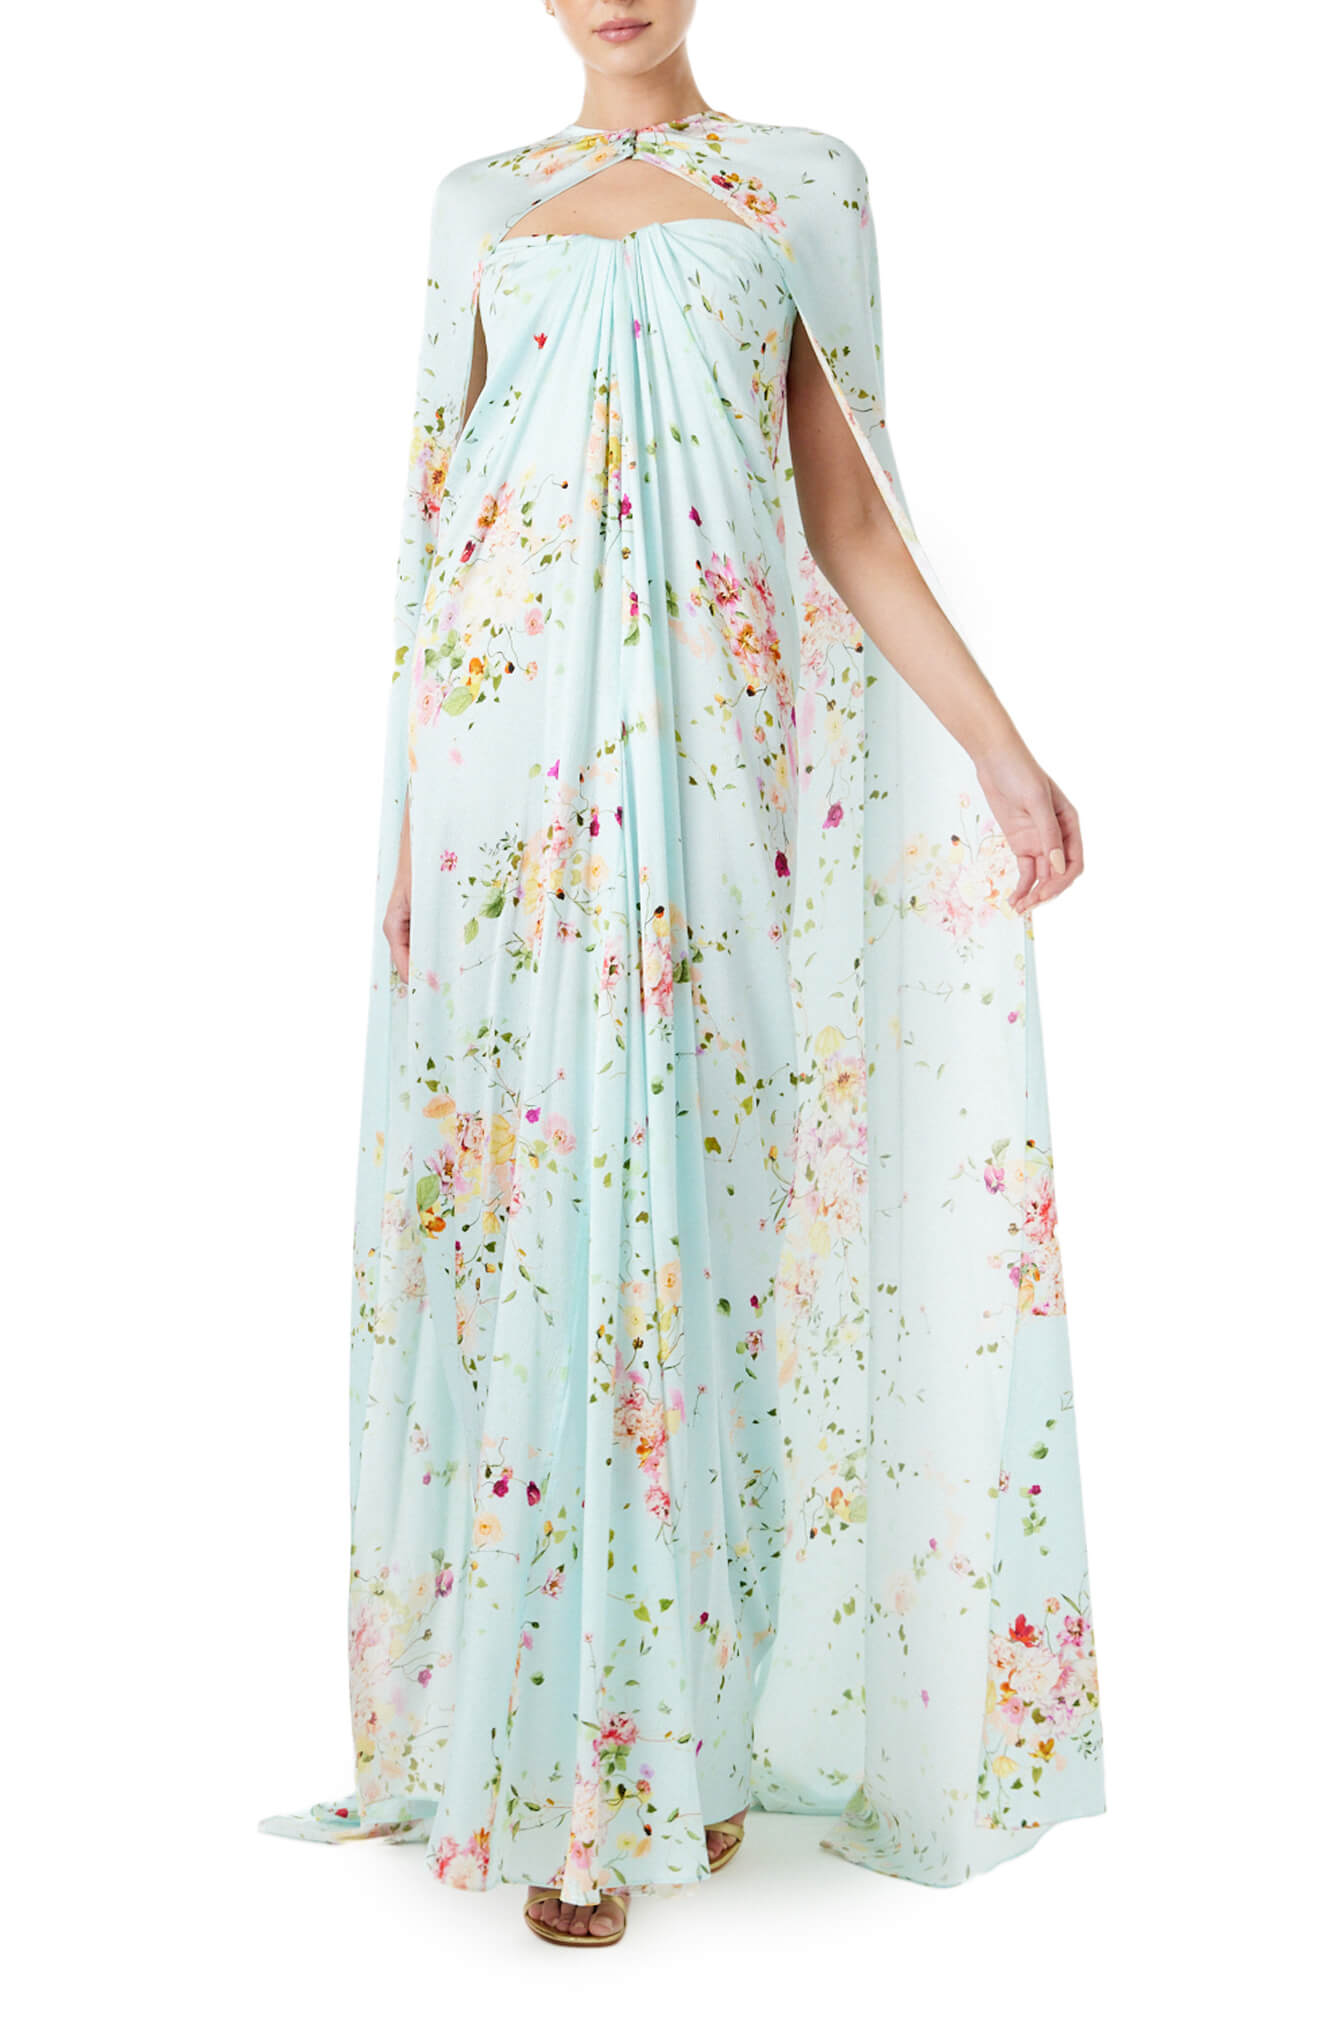 Monique Lhuillier strapless draped gown and cape in pistachio floral print fabric.